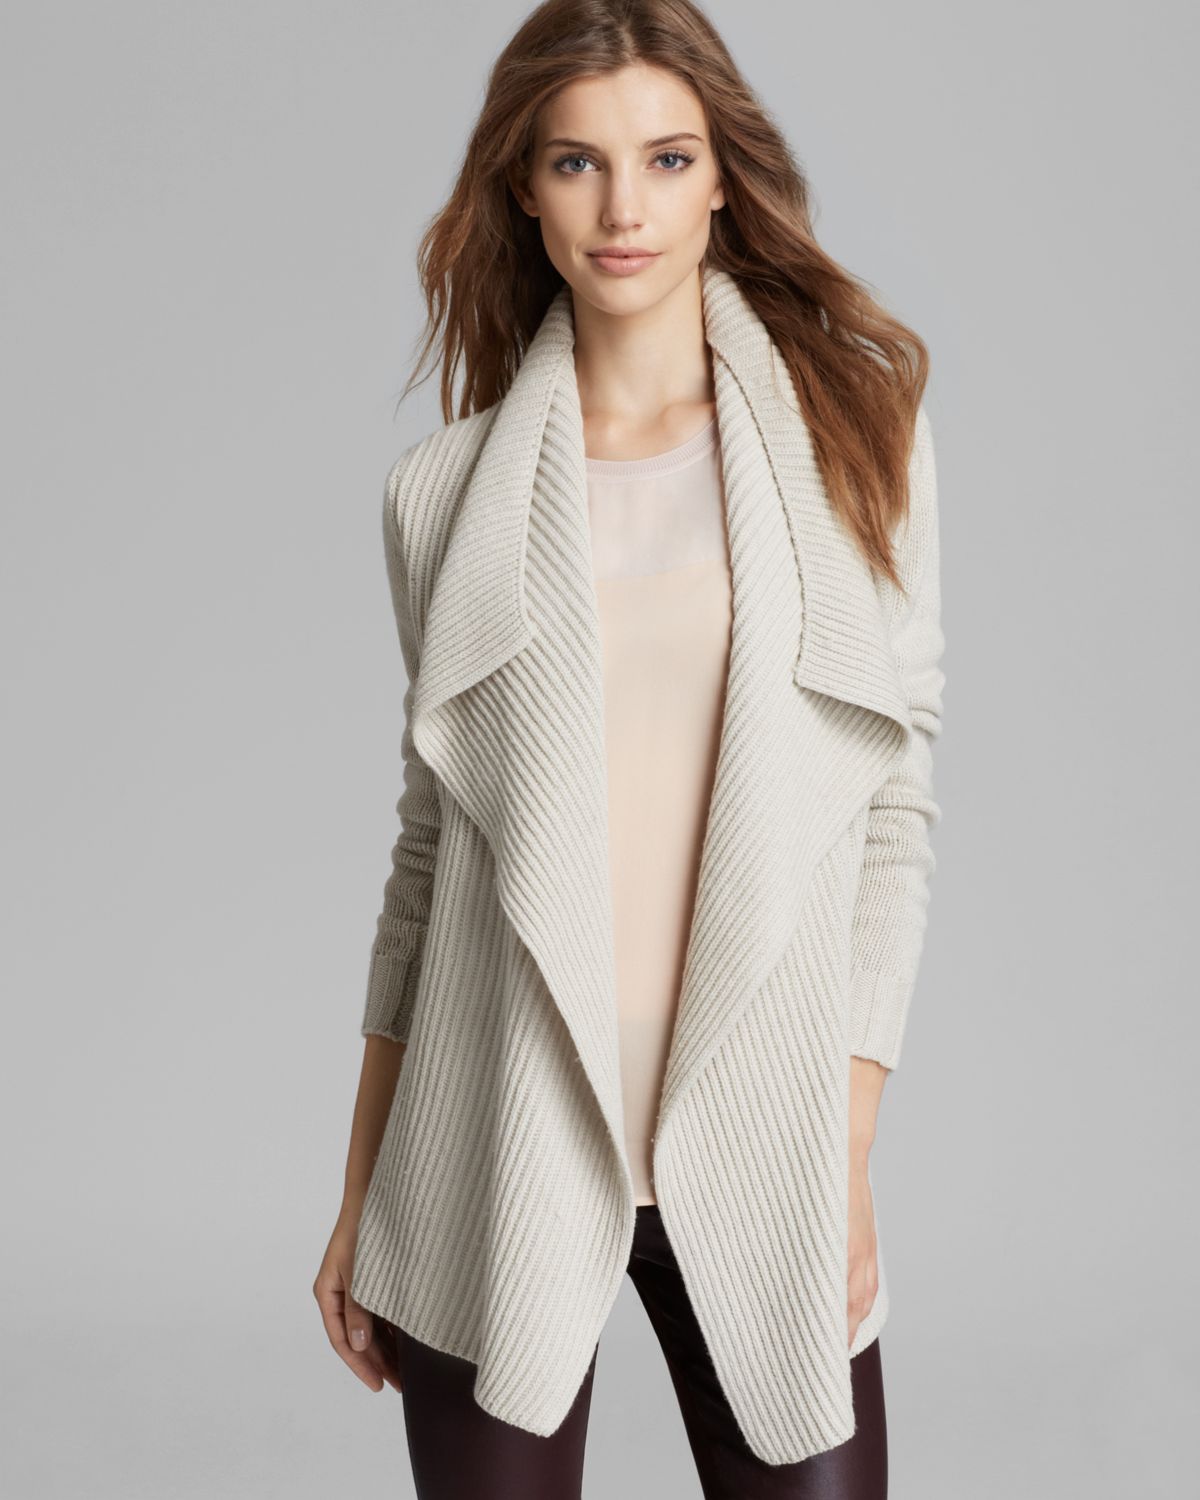 Lyst - Vince Cardigan Drape Front in White